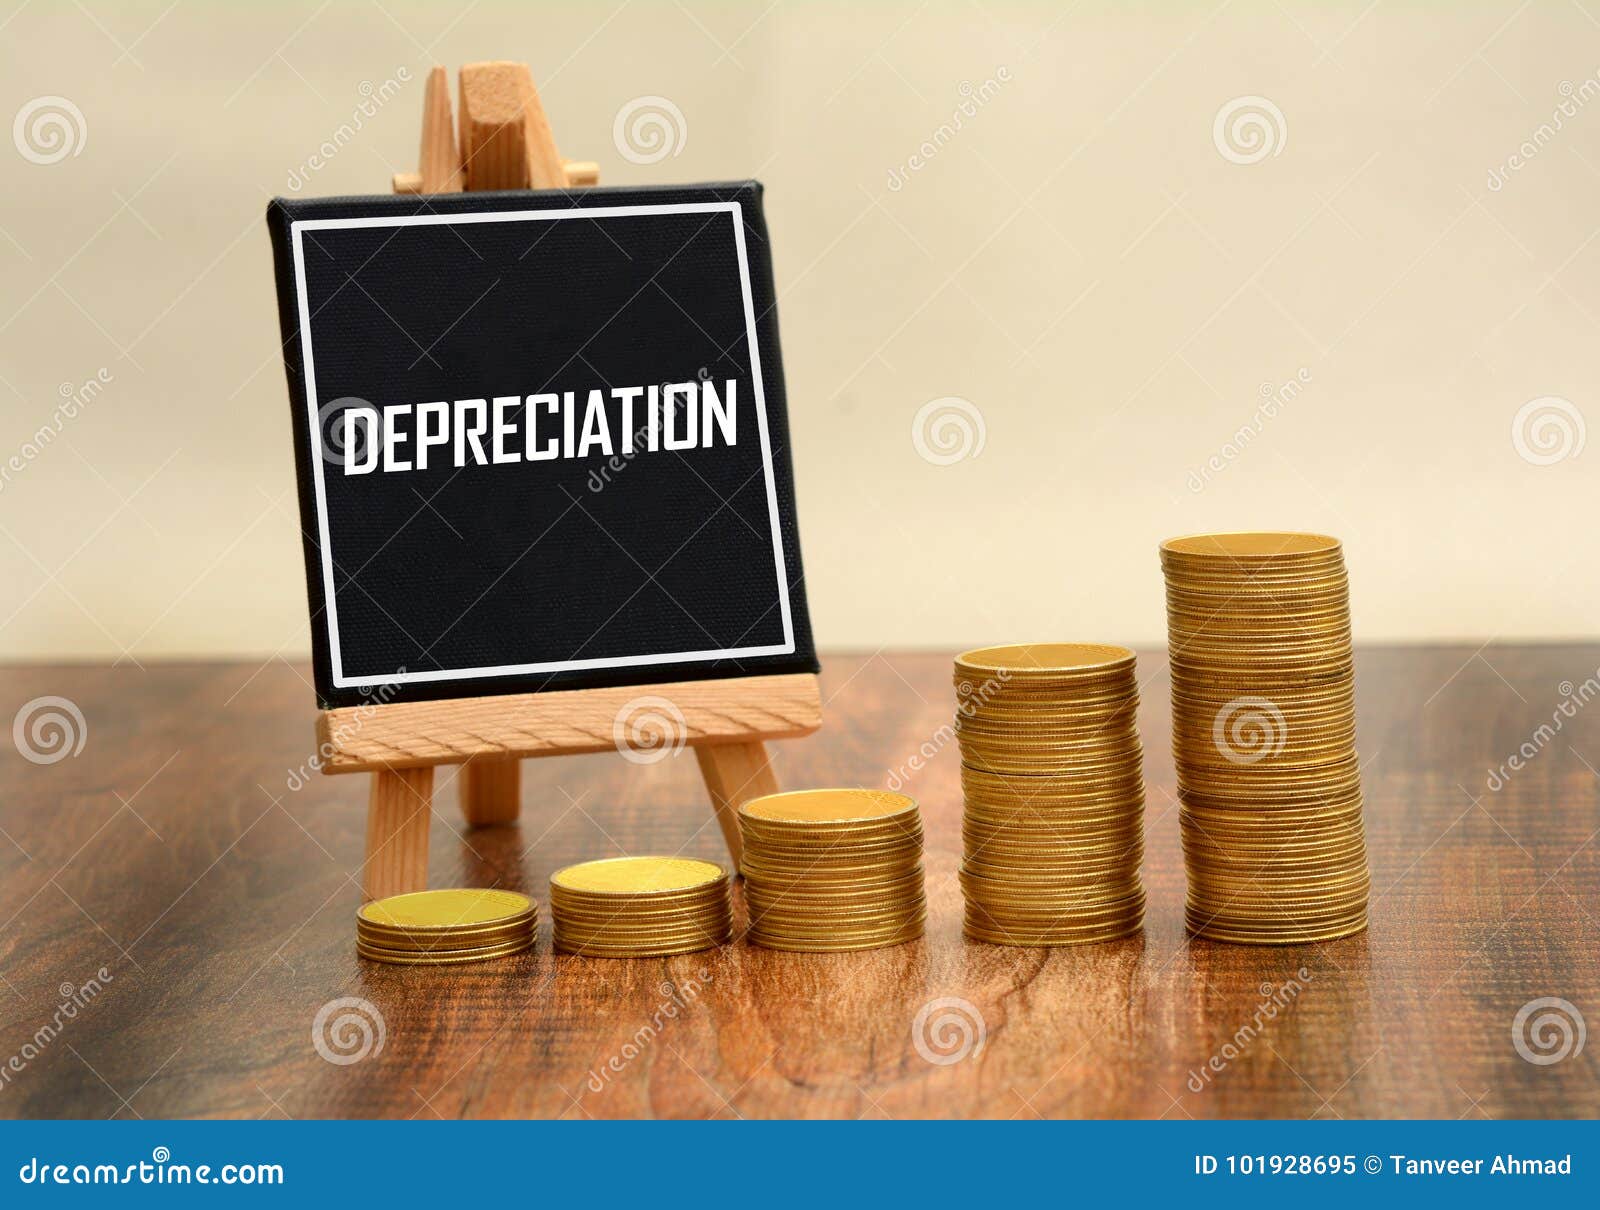 depreciation sign with currency gold coins stack